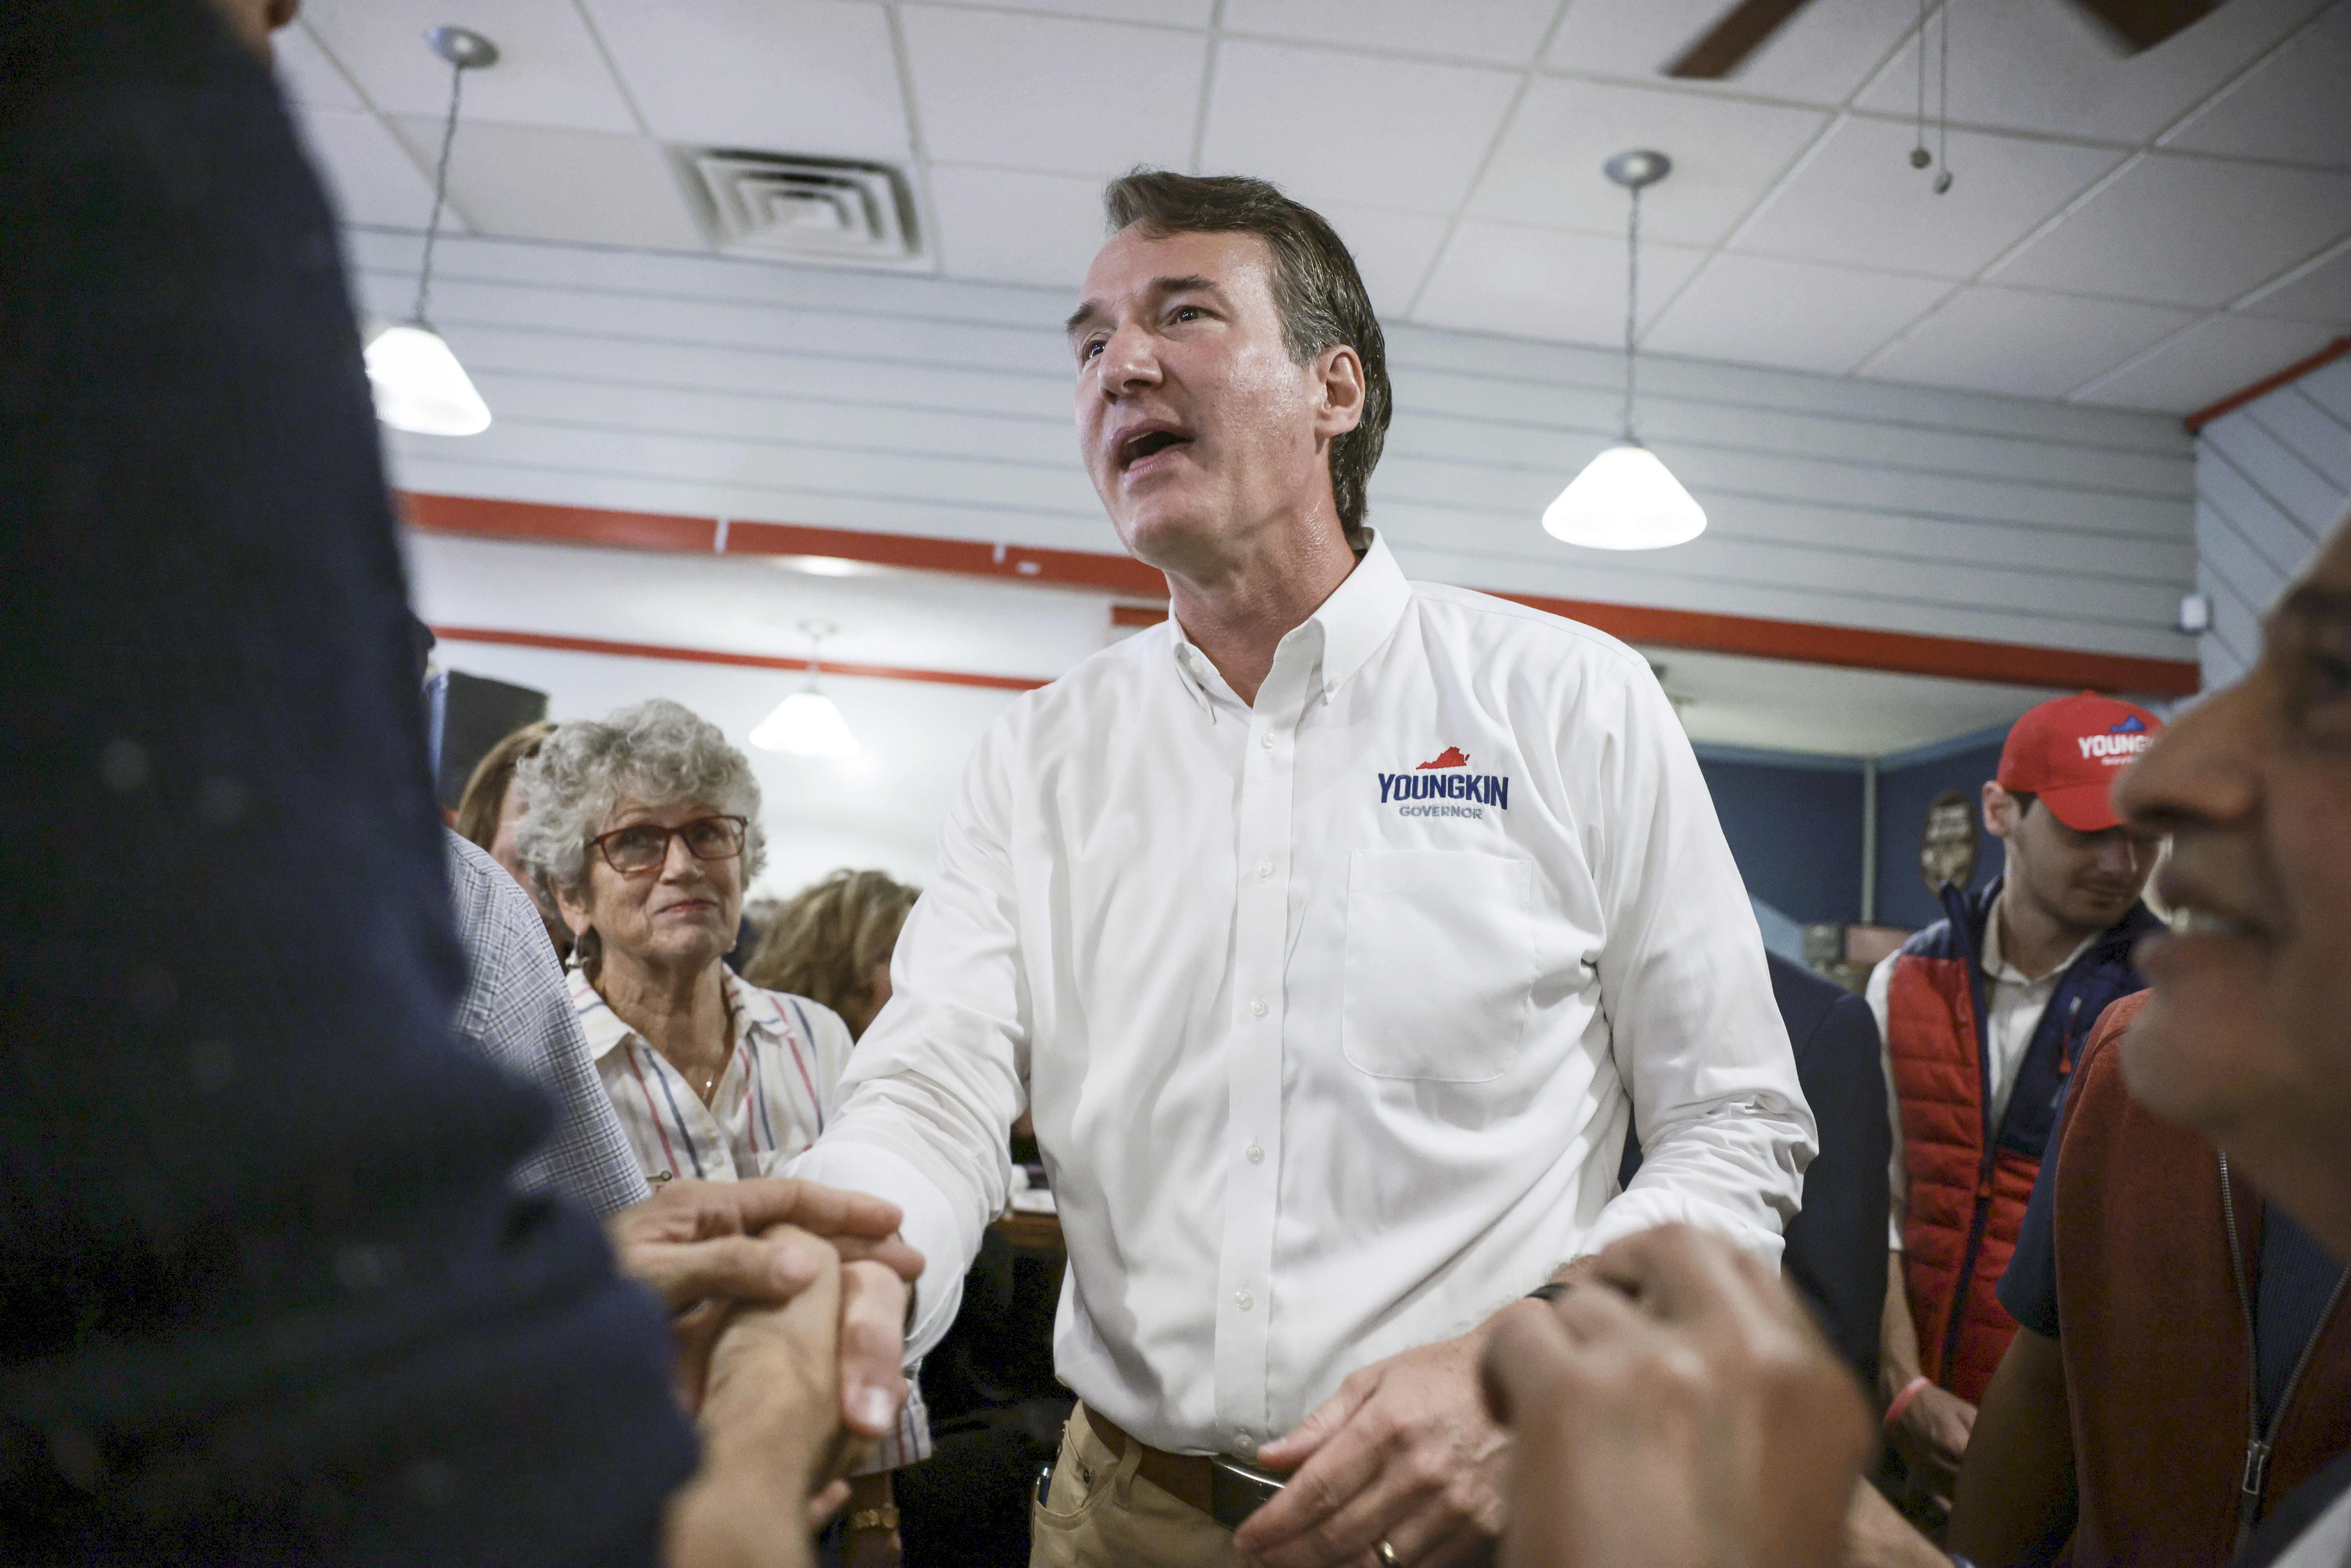 Republican candidate Glenn Youngkin greets supporters in Virginia Beach on Oct. 25. (Anna Moneymaker/Getty Images)